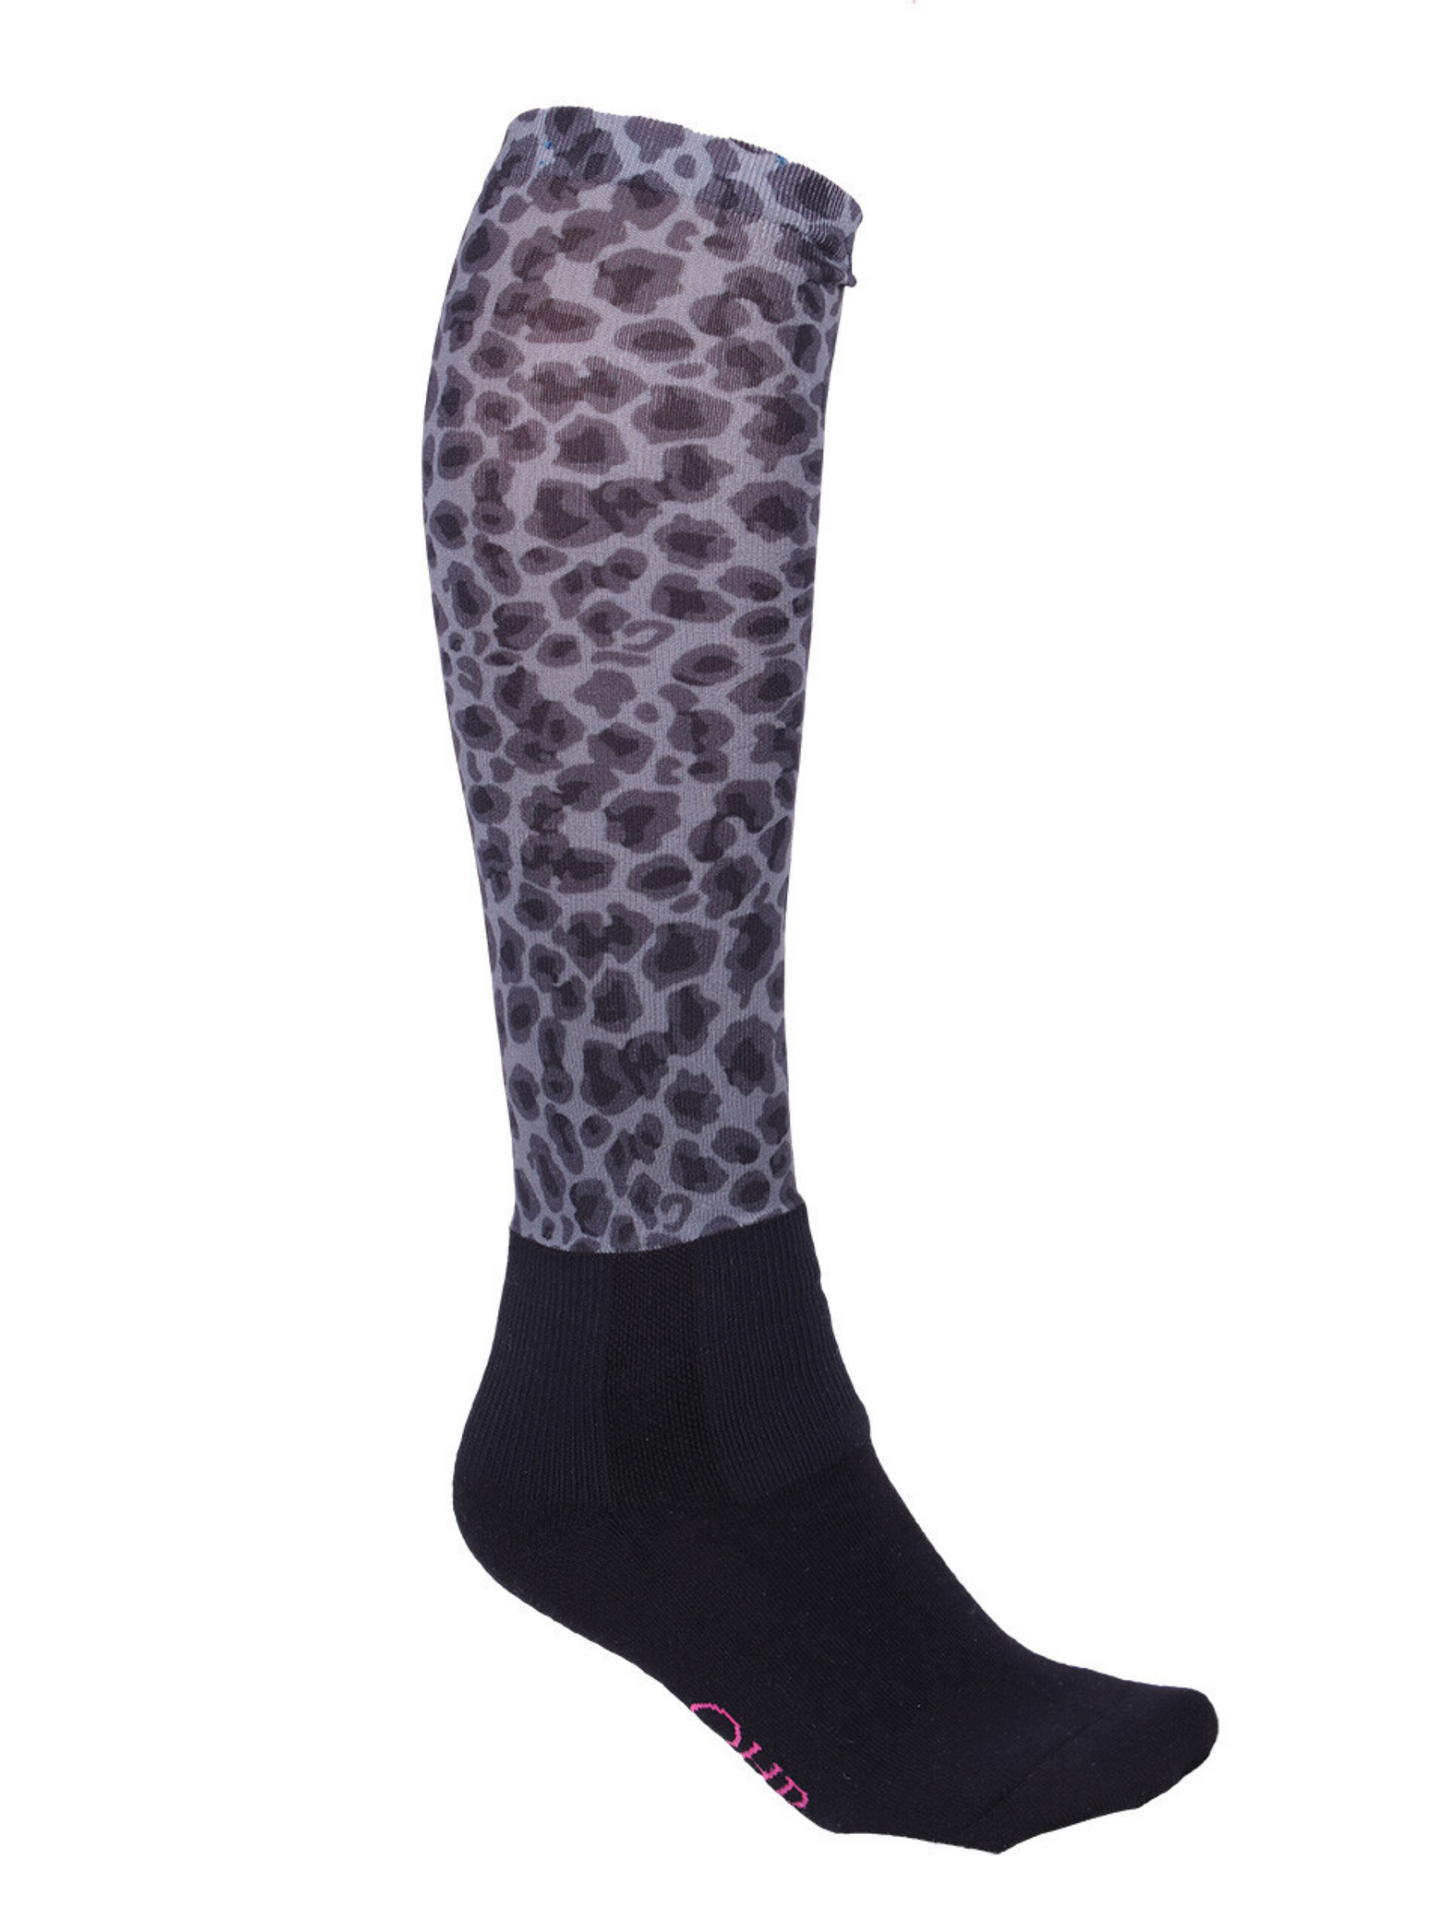 QHP Boot Socks Cheery Panther (Multiple Sizes)